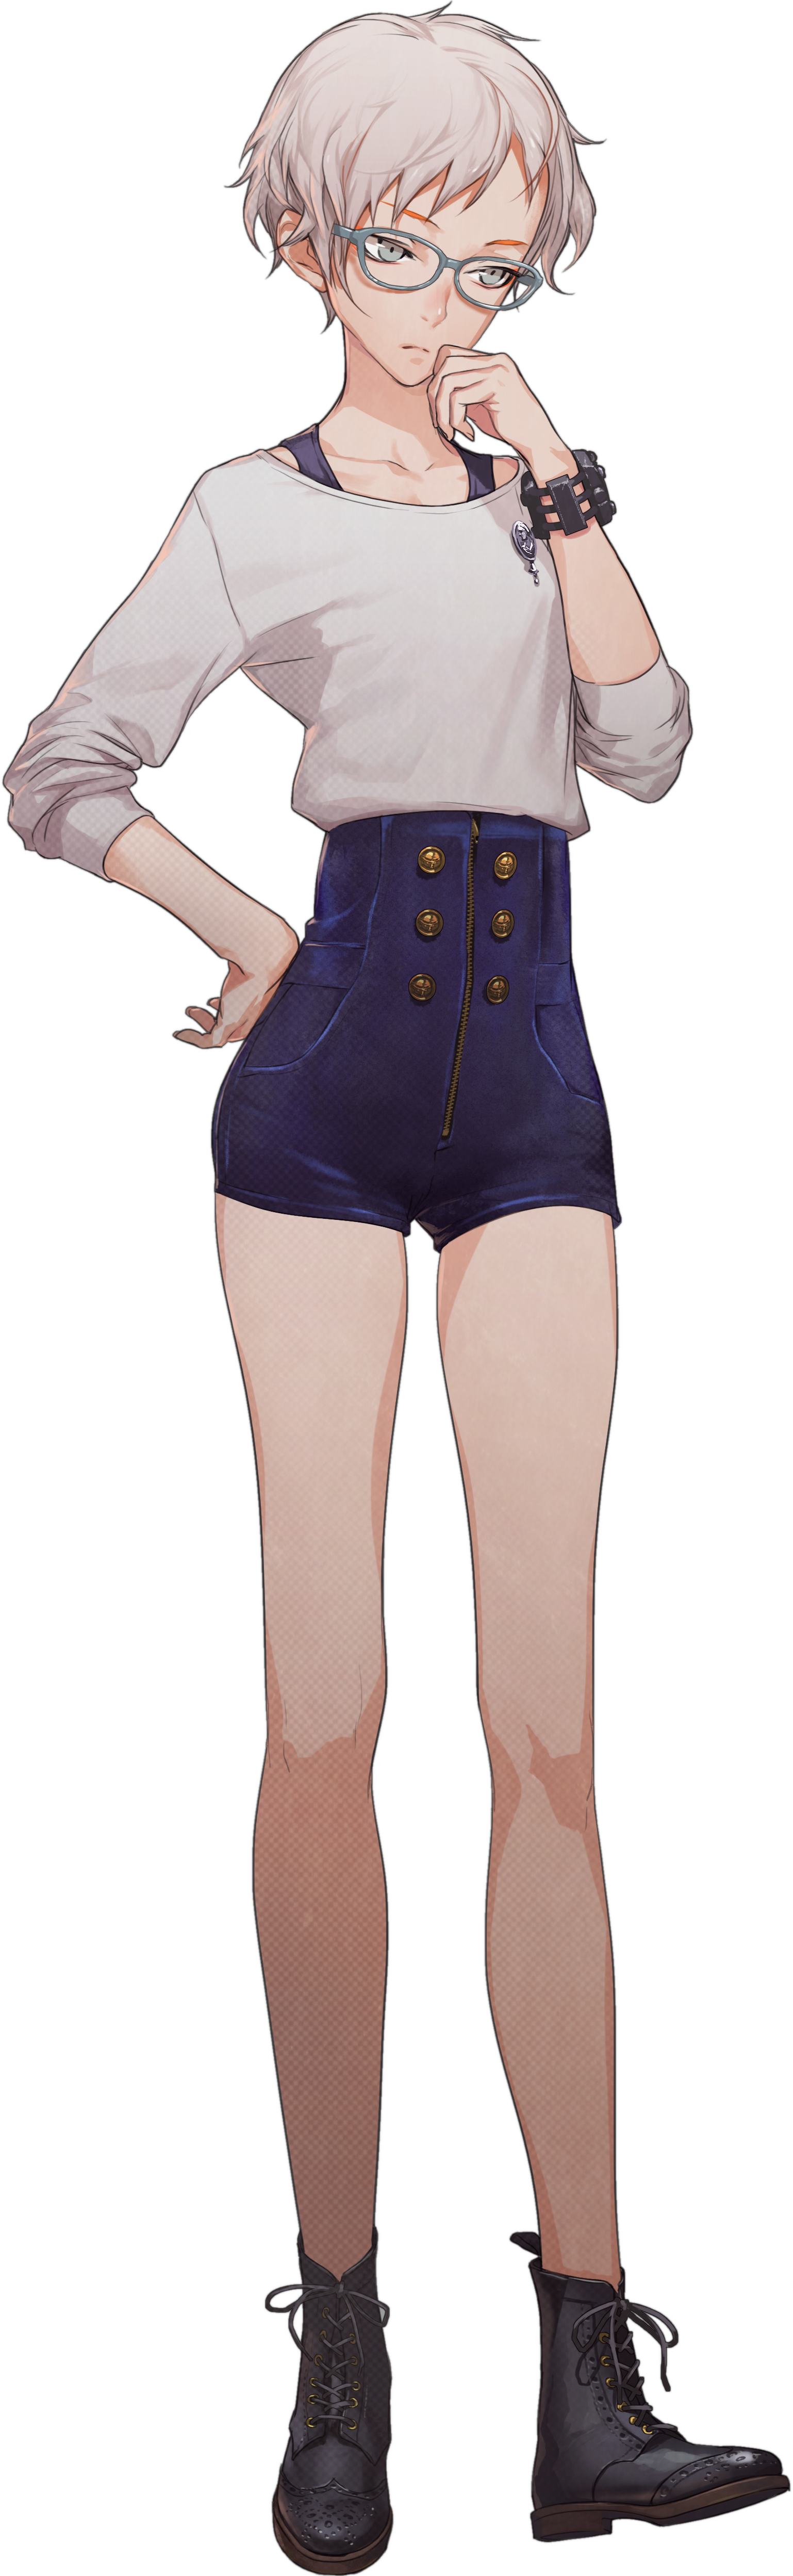 Image result for zero time dilemma phi